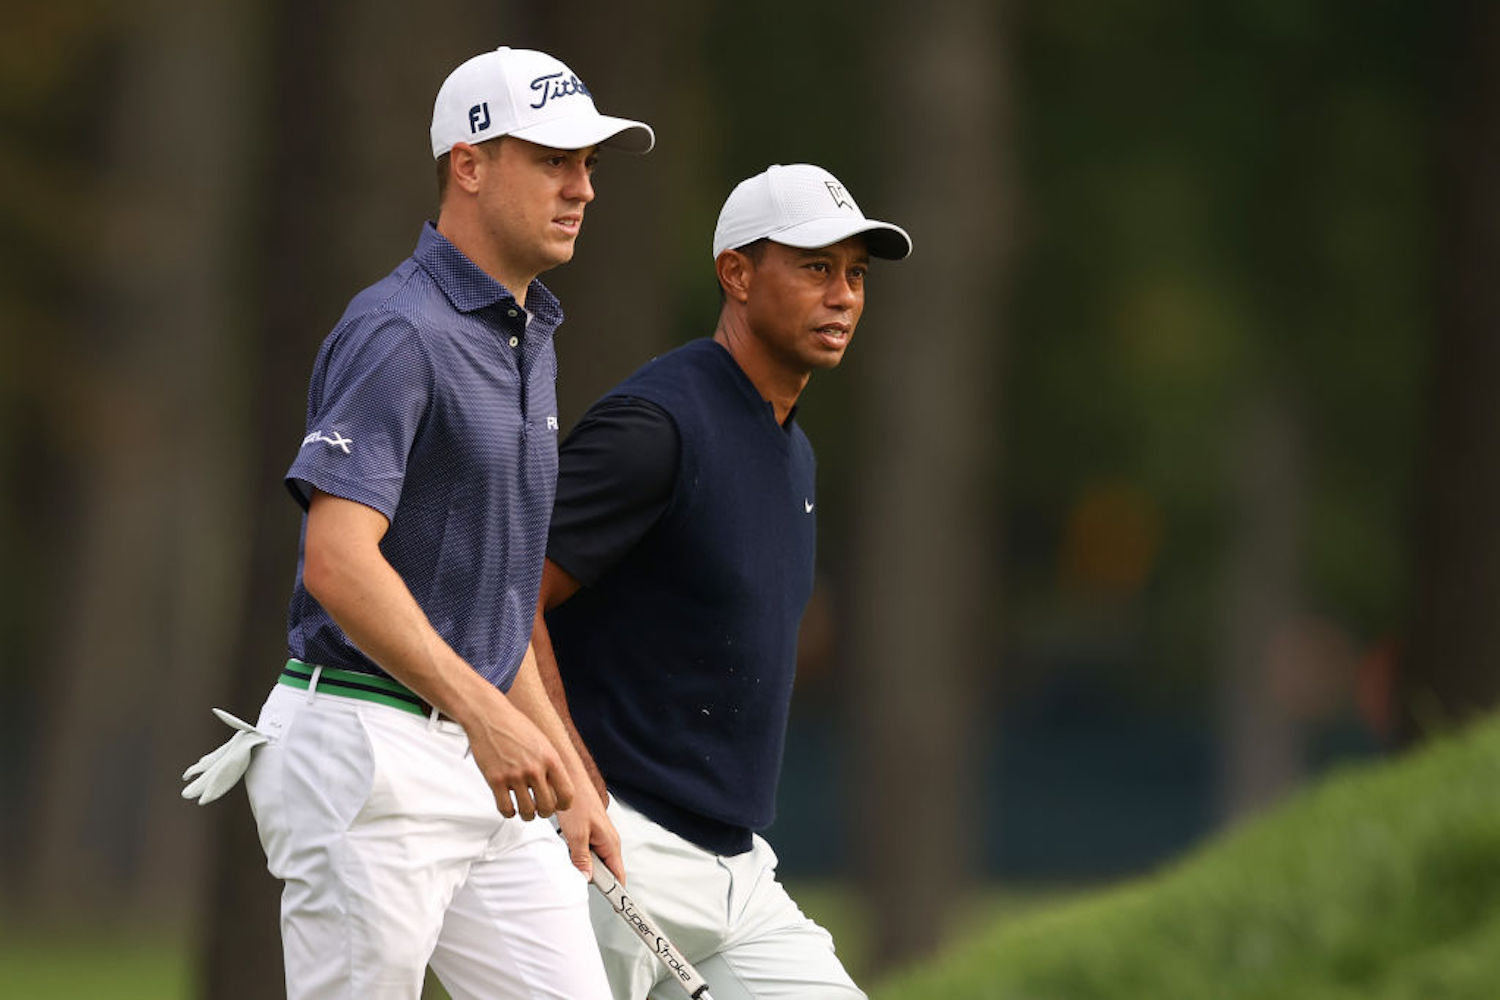 Justin Thomas Broke a Candle Playing Home Run Derby In His First Visit to Tiger Woods’ House